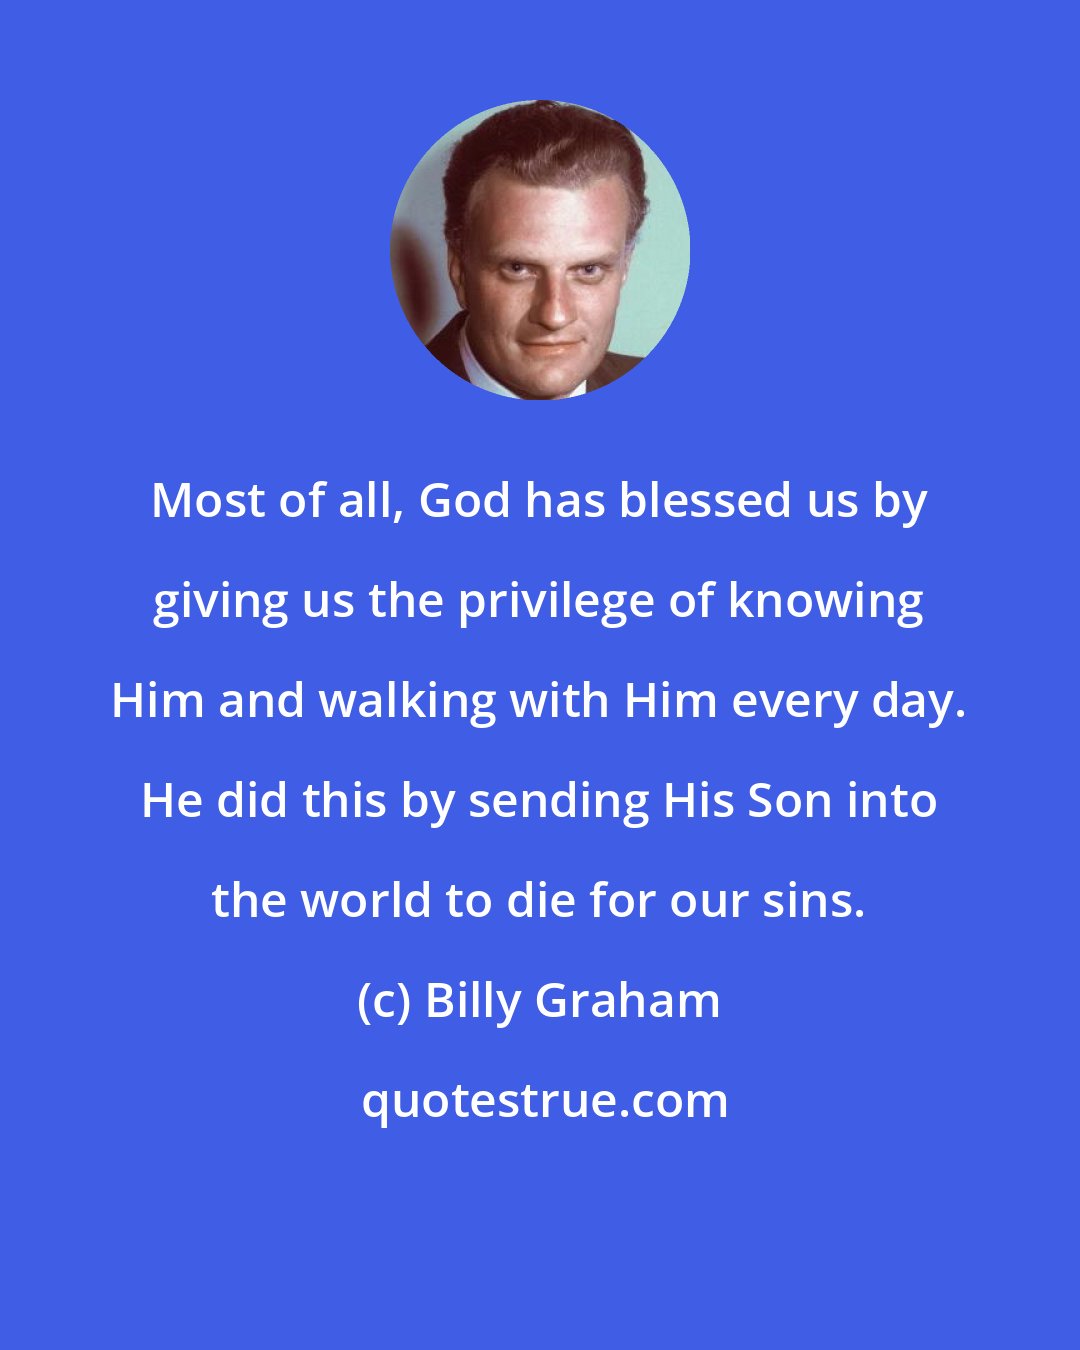 Billy Graham: Most of all, God has blessed us by giving us the privilege of knowing Him and walking with Him every day. He did this by sending His Son into the world to die for our sins.